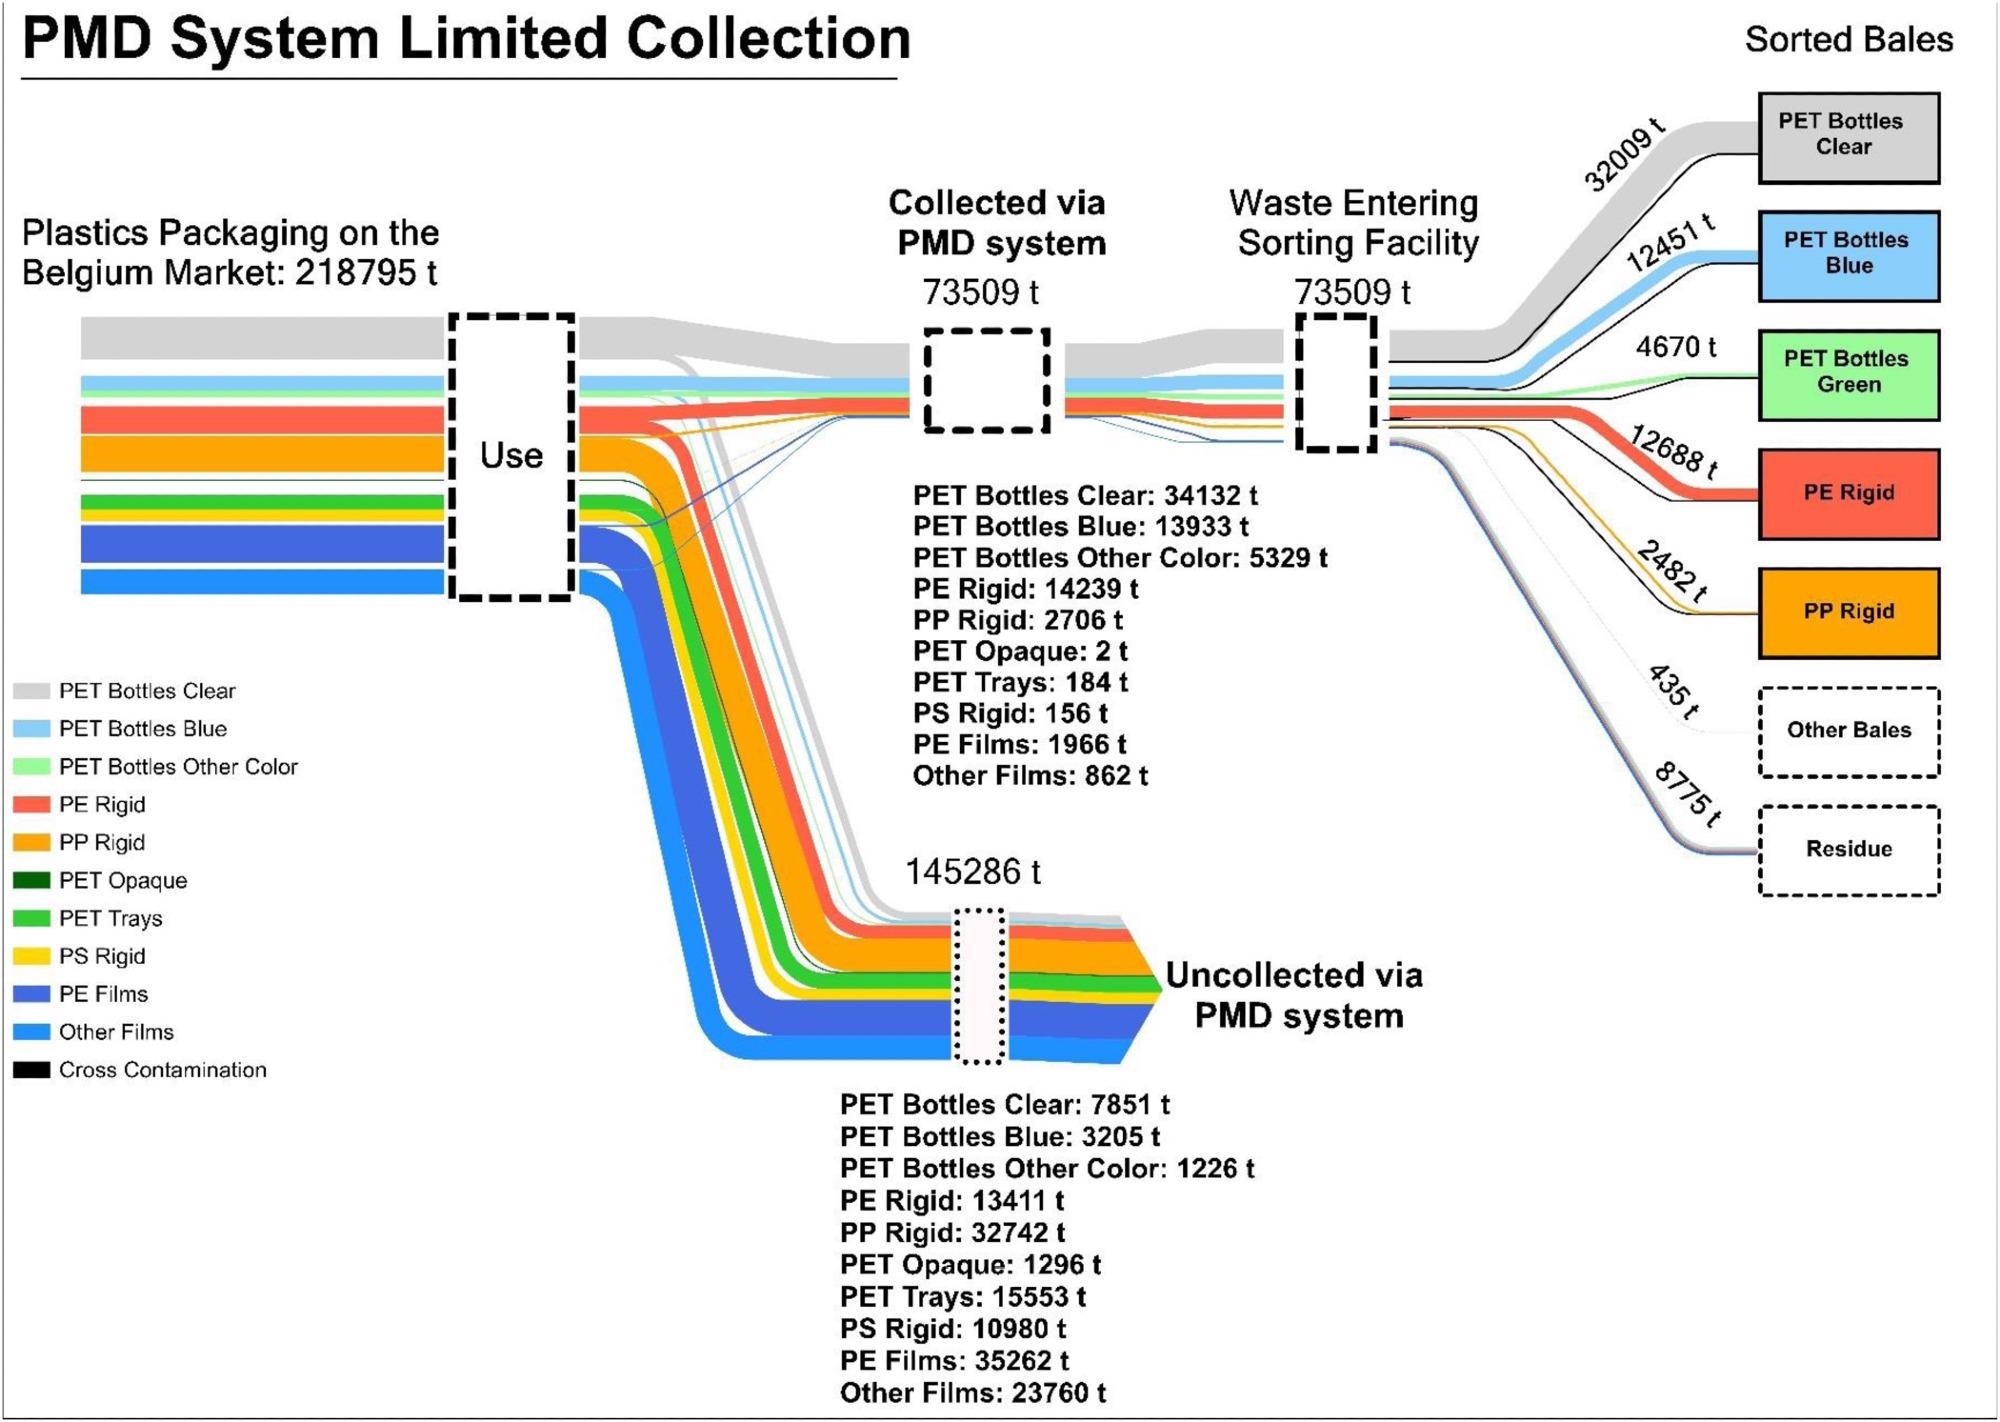 MFA of plastic packaging as collected by the limited collection system (i.e., PMD system) from the moment that the packaging came on the market in 2015 until the end of the sorting process at MRFs, resulting in 5 sorted plastic waste fractions, 3 non-plastic waste fractions (i.e., ferro, non-ferro, and beverage cartons) which are here merged as ‘other bales’, and a residue stream. Cross-contamination by non-target packaging items in a certain sorted bale is visualized by black flow lines.